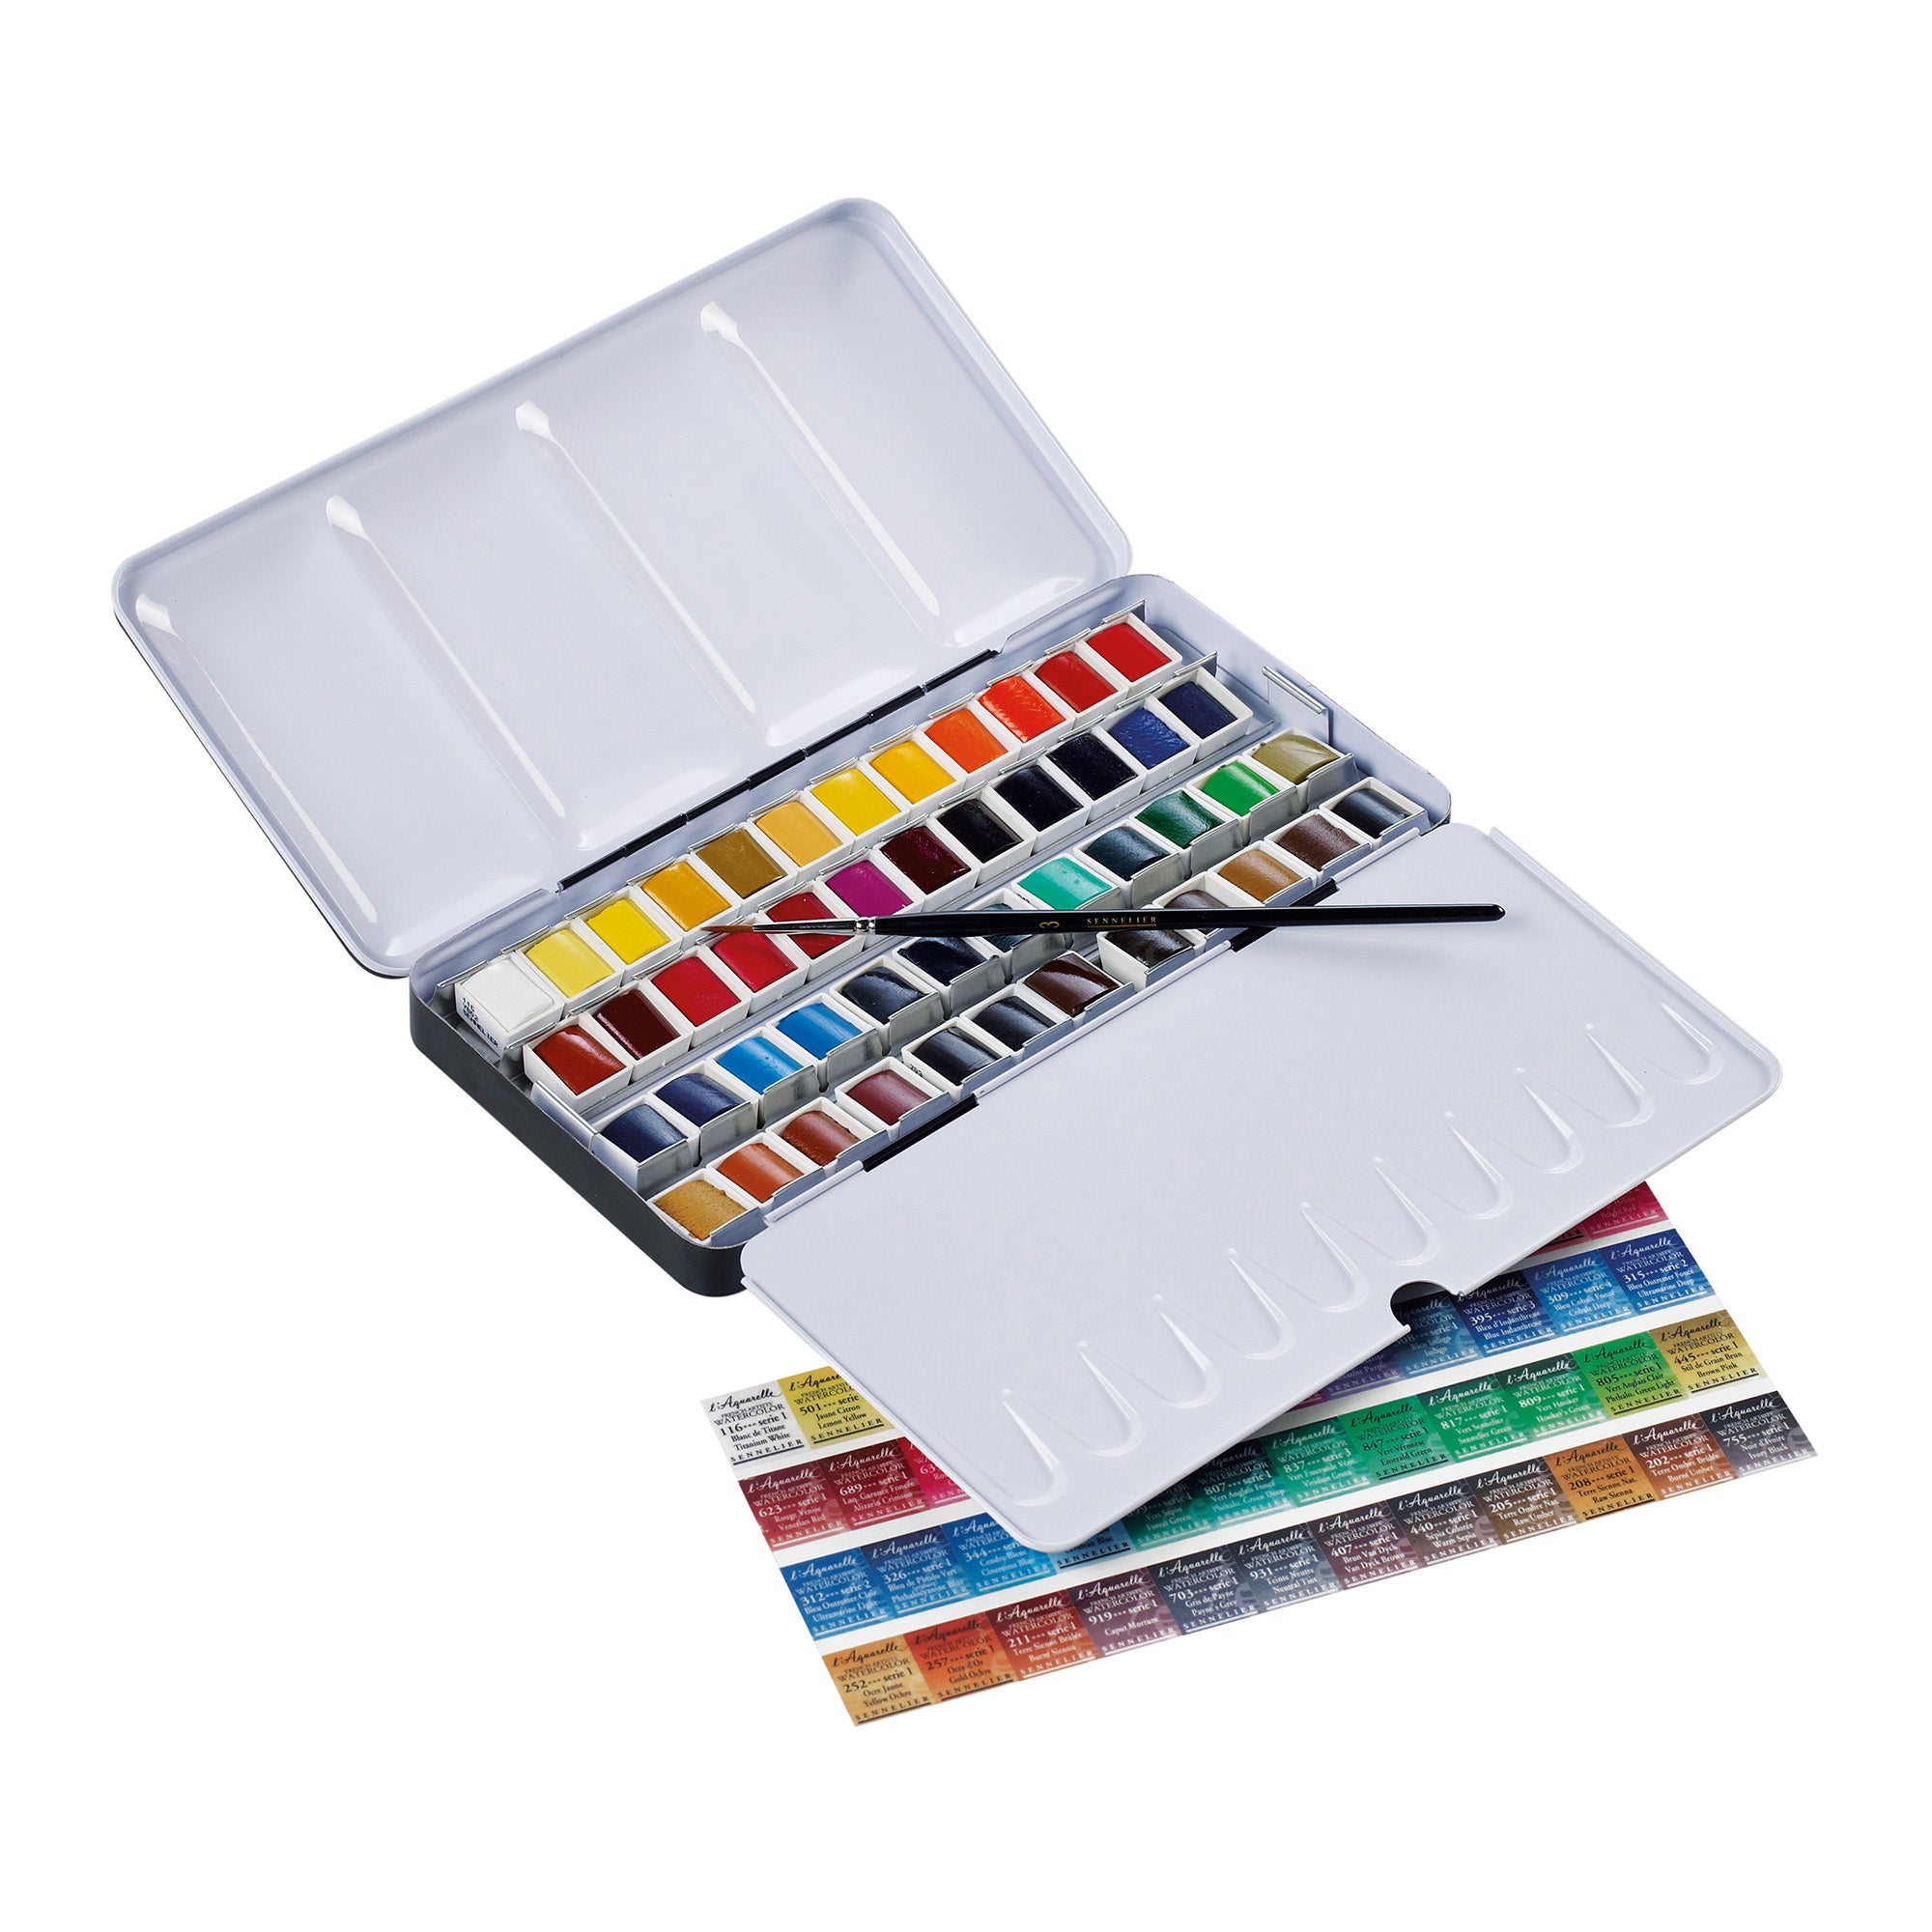 Buy AB Watercolour Bucket with Palette, Best Watercolor Water Container,  Watercolor Painting Materials, Artists Supplies, Art Supplies: Victoria,  Australia at